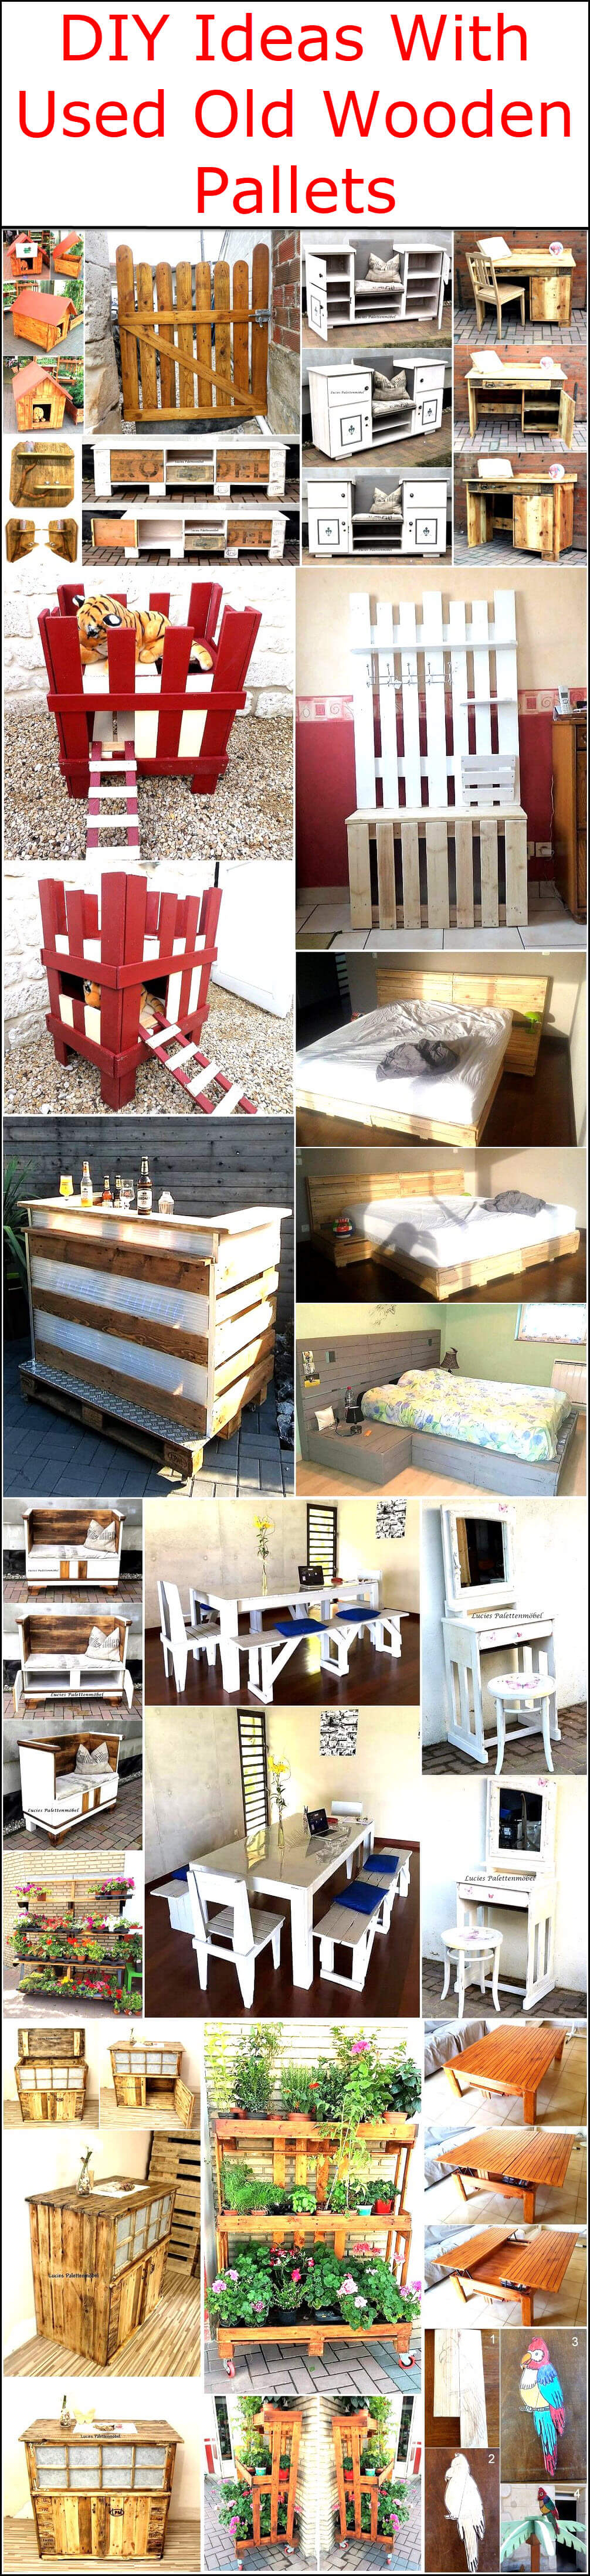 DIY Ideas With Used Old Wooden Pallets